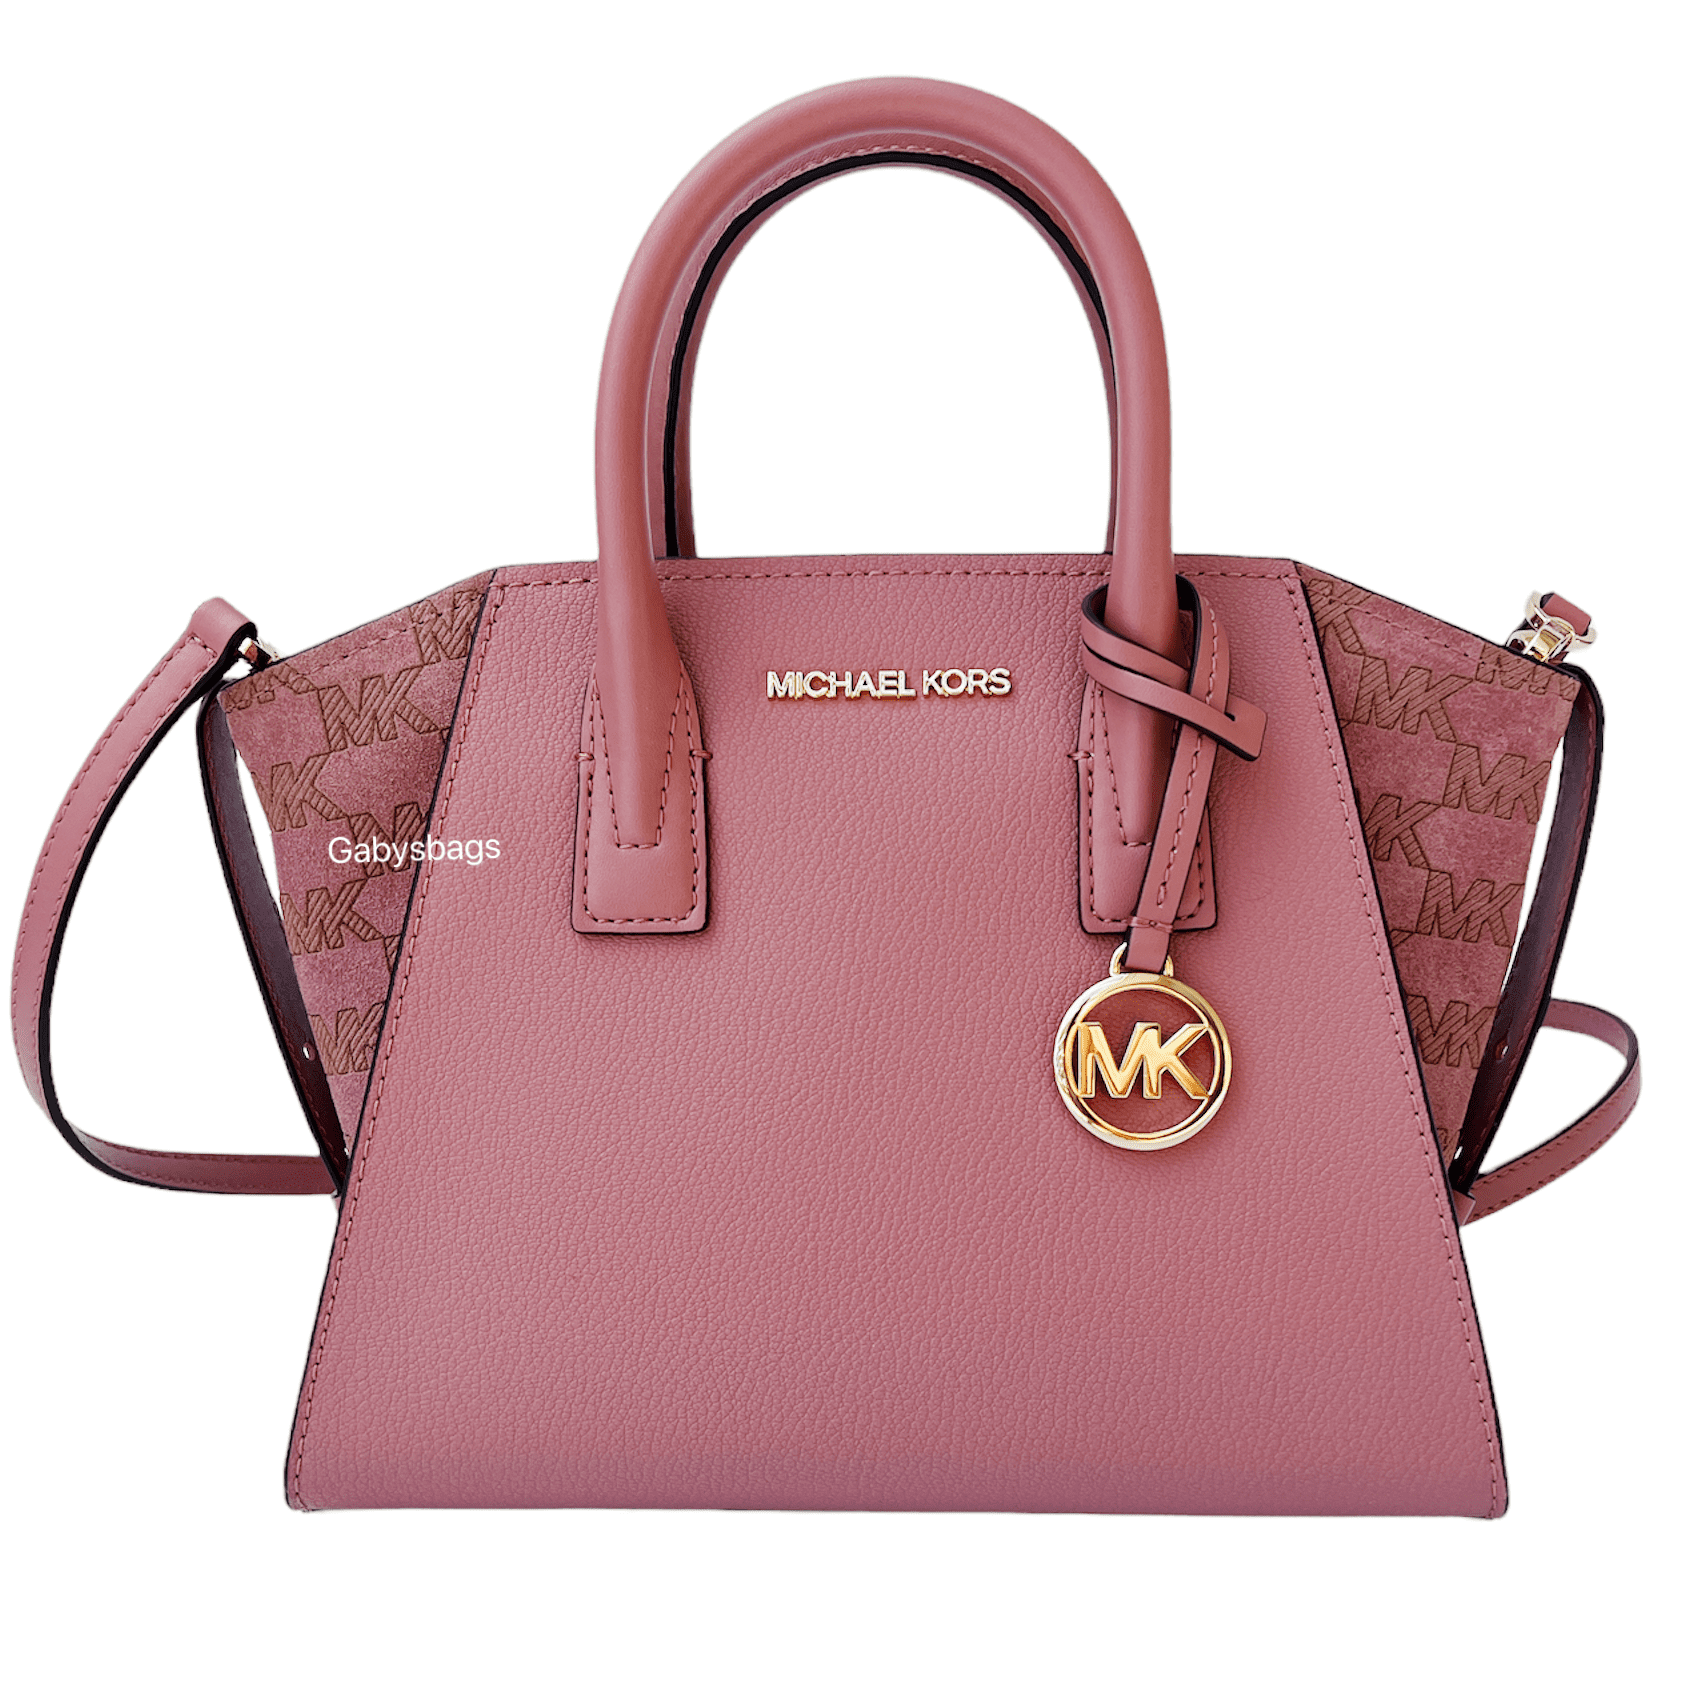 WHATS IN MY MICHAEL KORS SANDRINE/ WHATS FIT IN! #whatsinmybag2022 